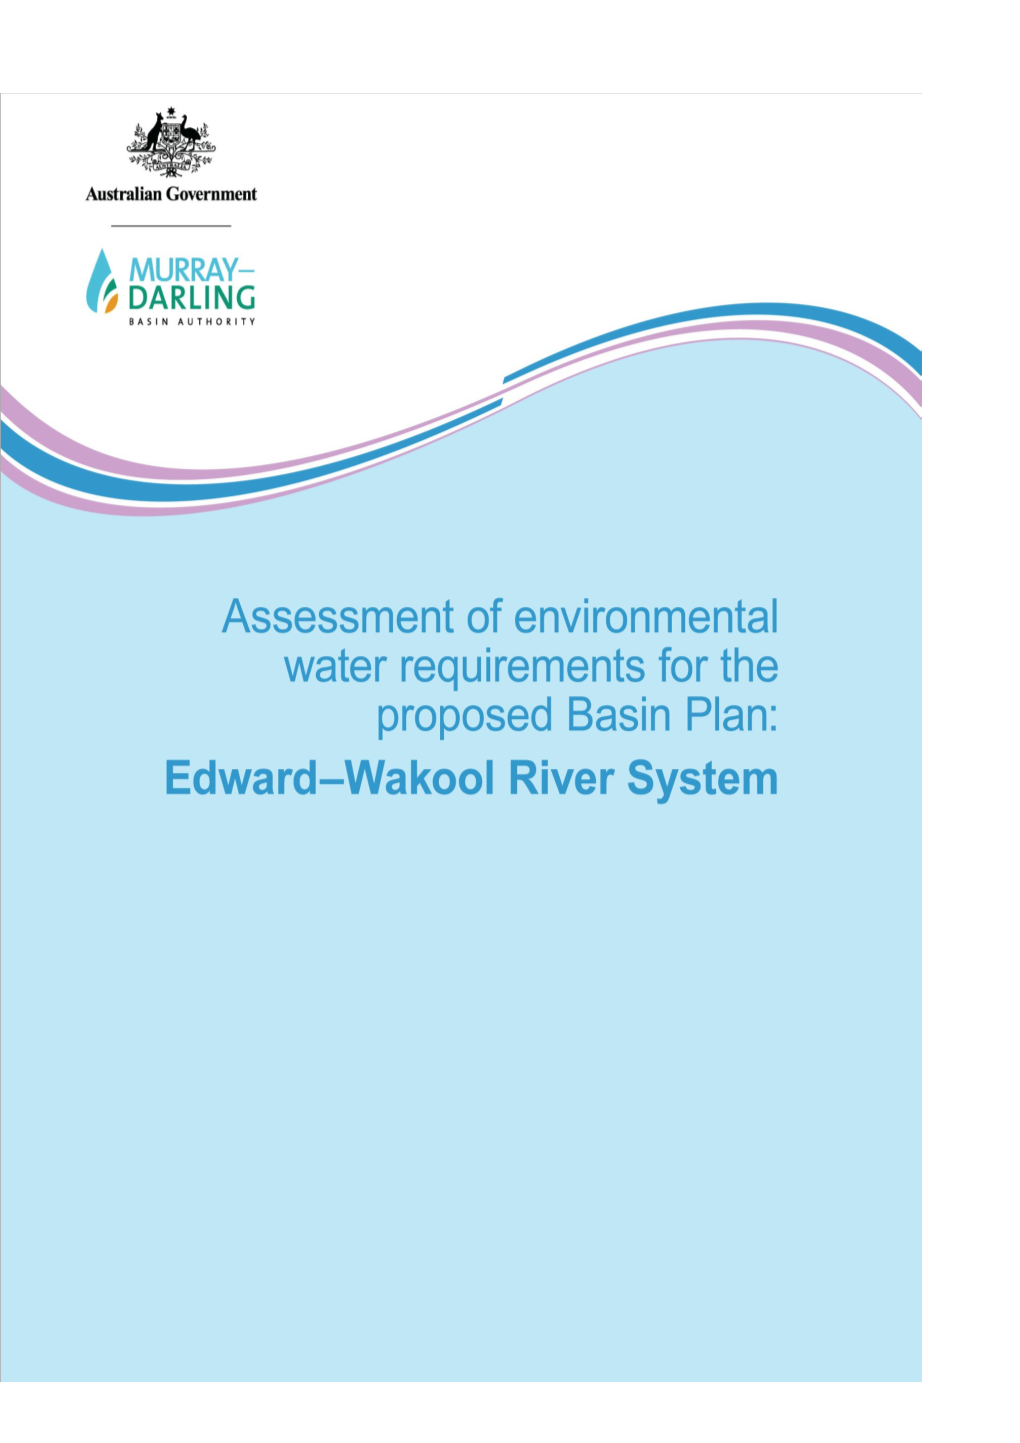 Assessment of Environmental Water Requirements for the Proposed Basin Plan:Edward Wakool